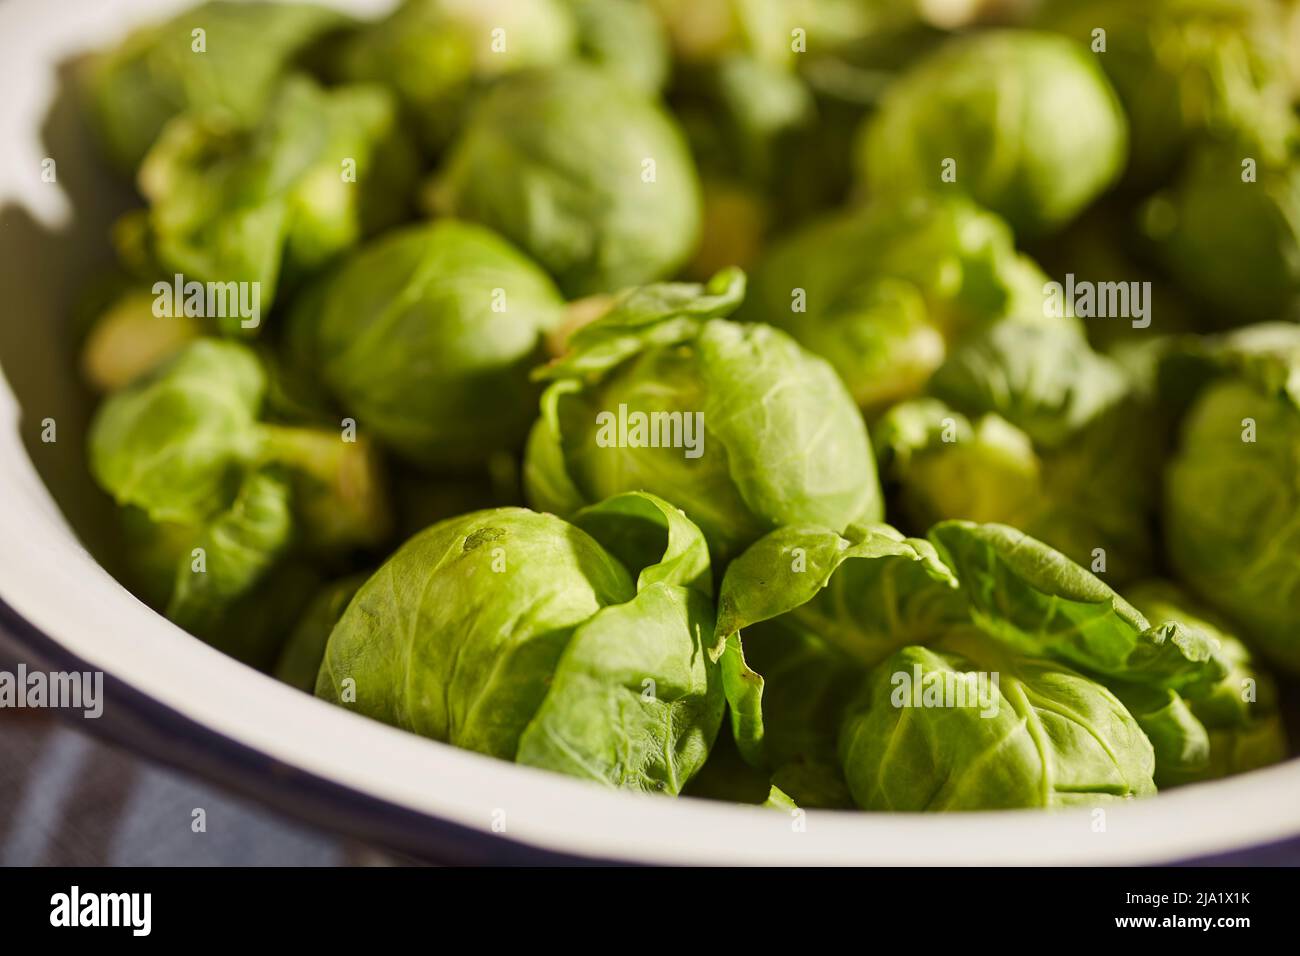 A bowl of raw, whole Brussels sprouts grown in Lancaster, Pennsylvania, USA Stock Photo